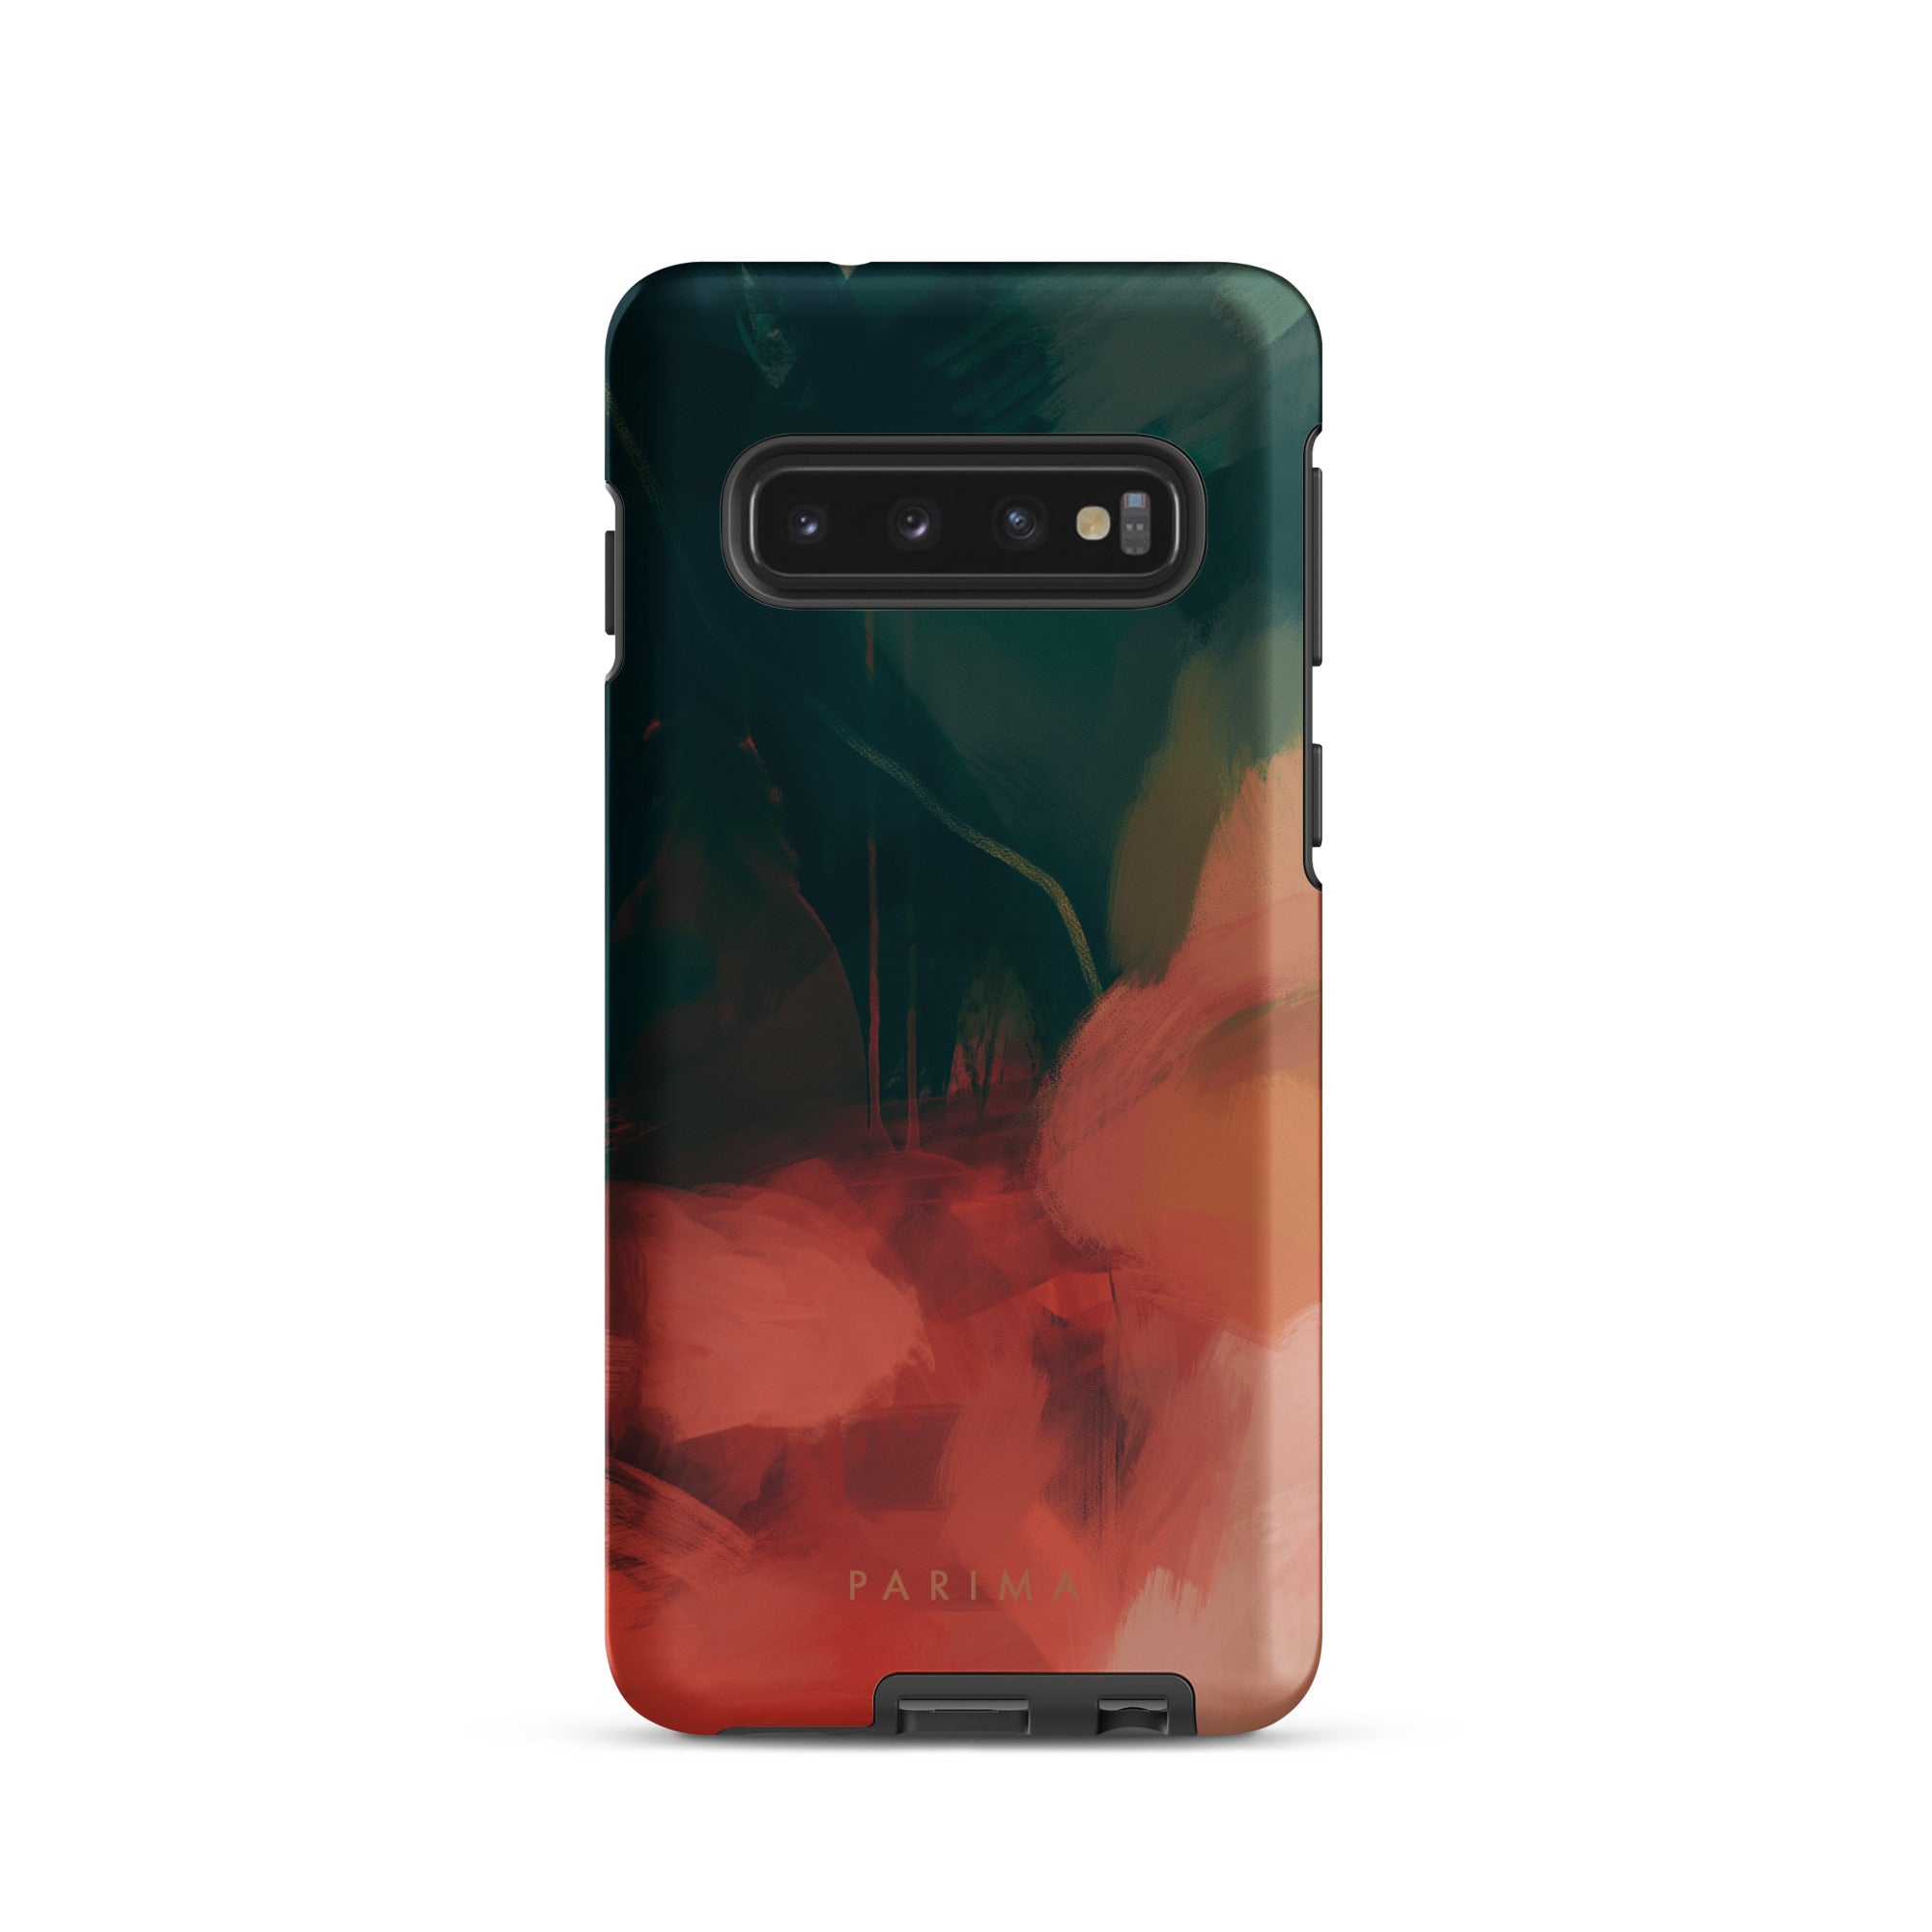 Eventide, green and red abstract art on Samsung Galaxy S10 tough case by Parima Studio